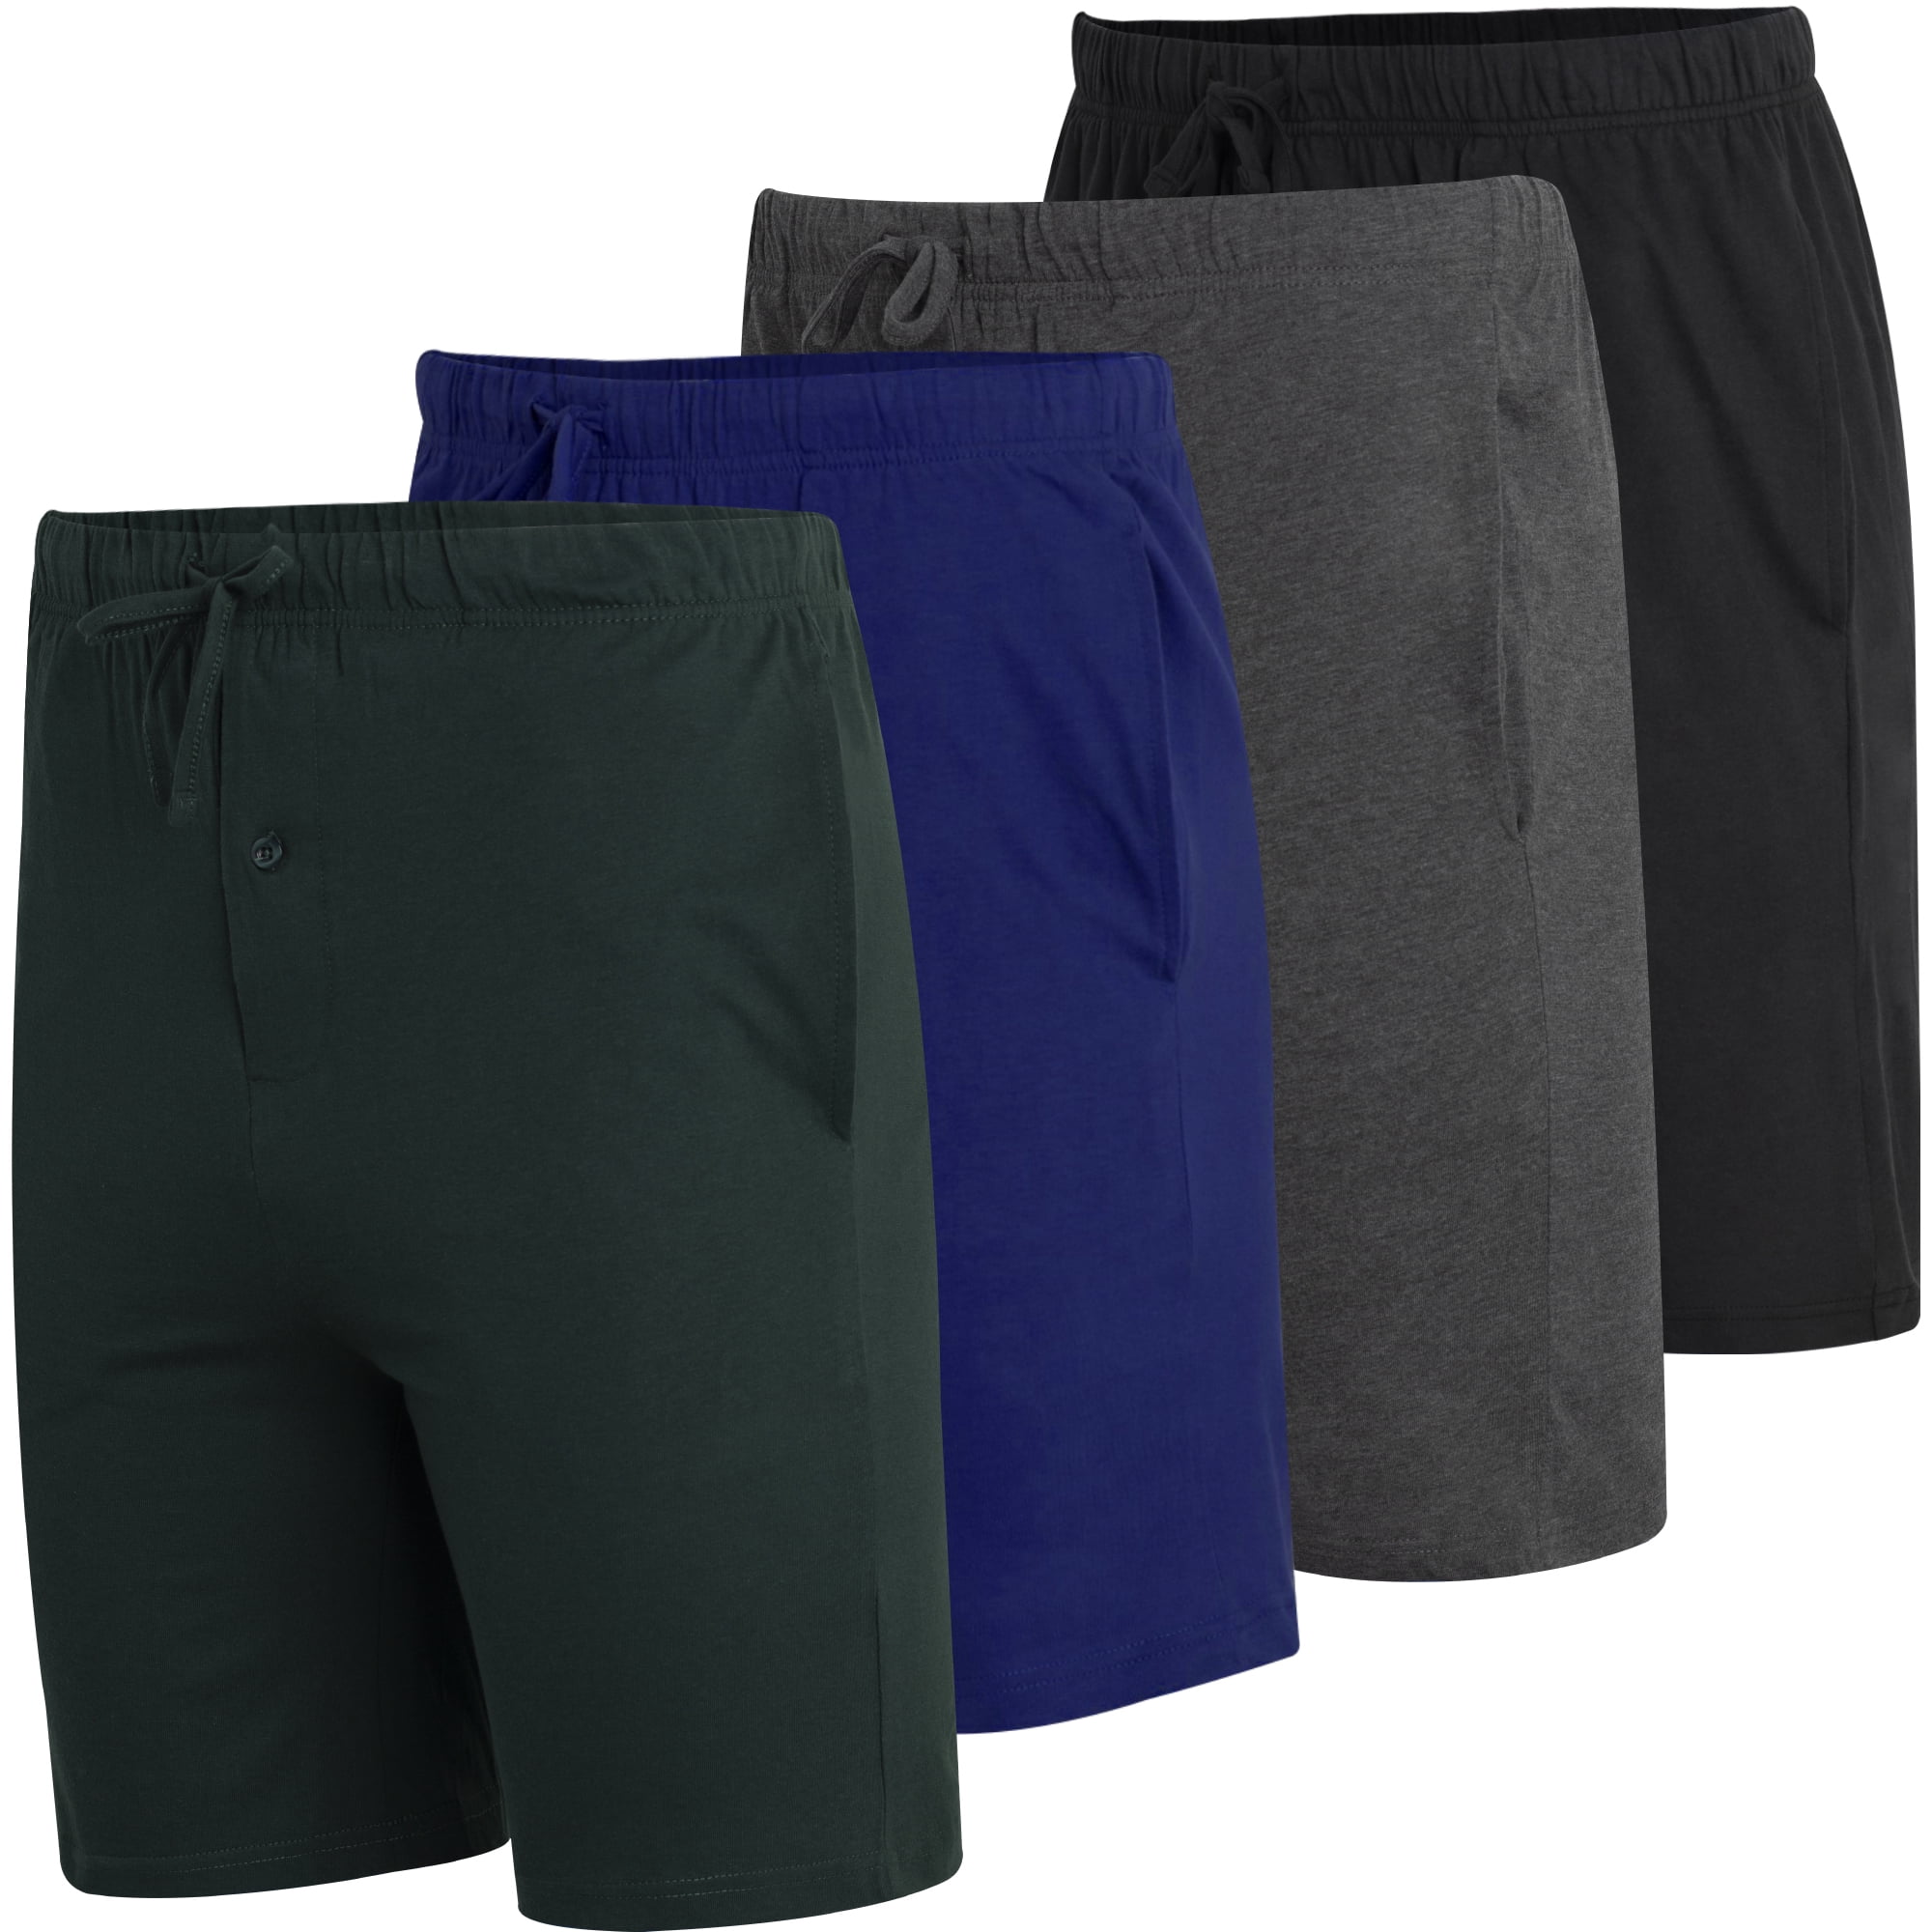 Real Essentials Men's 4-Pack Soft Knit Sleep Shorts, Sizes S-3XL, Mens ...